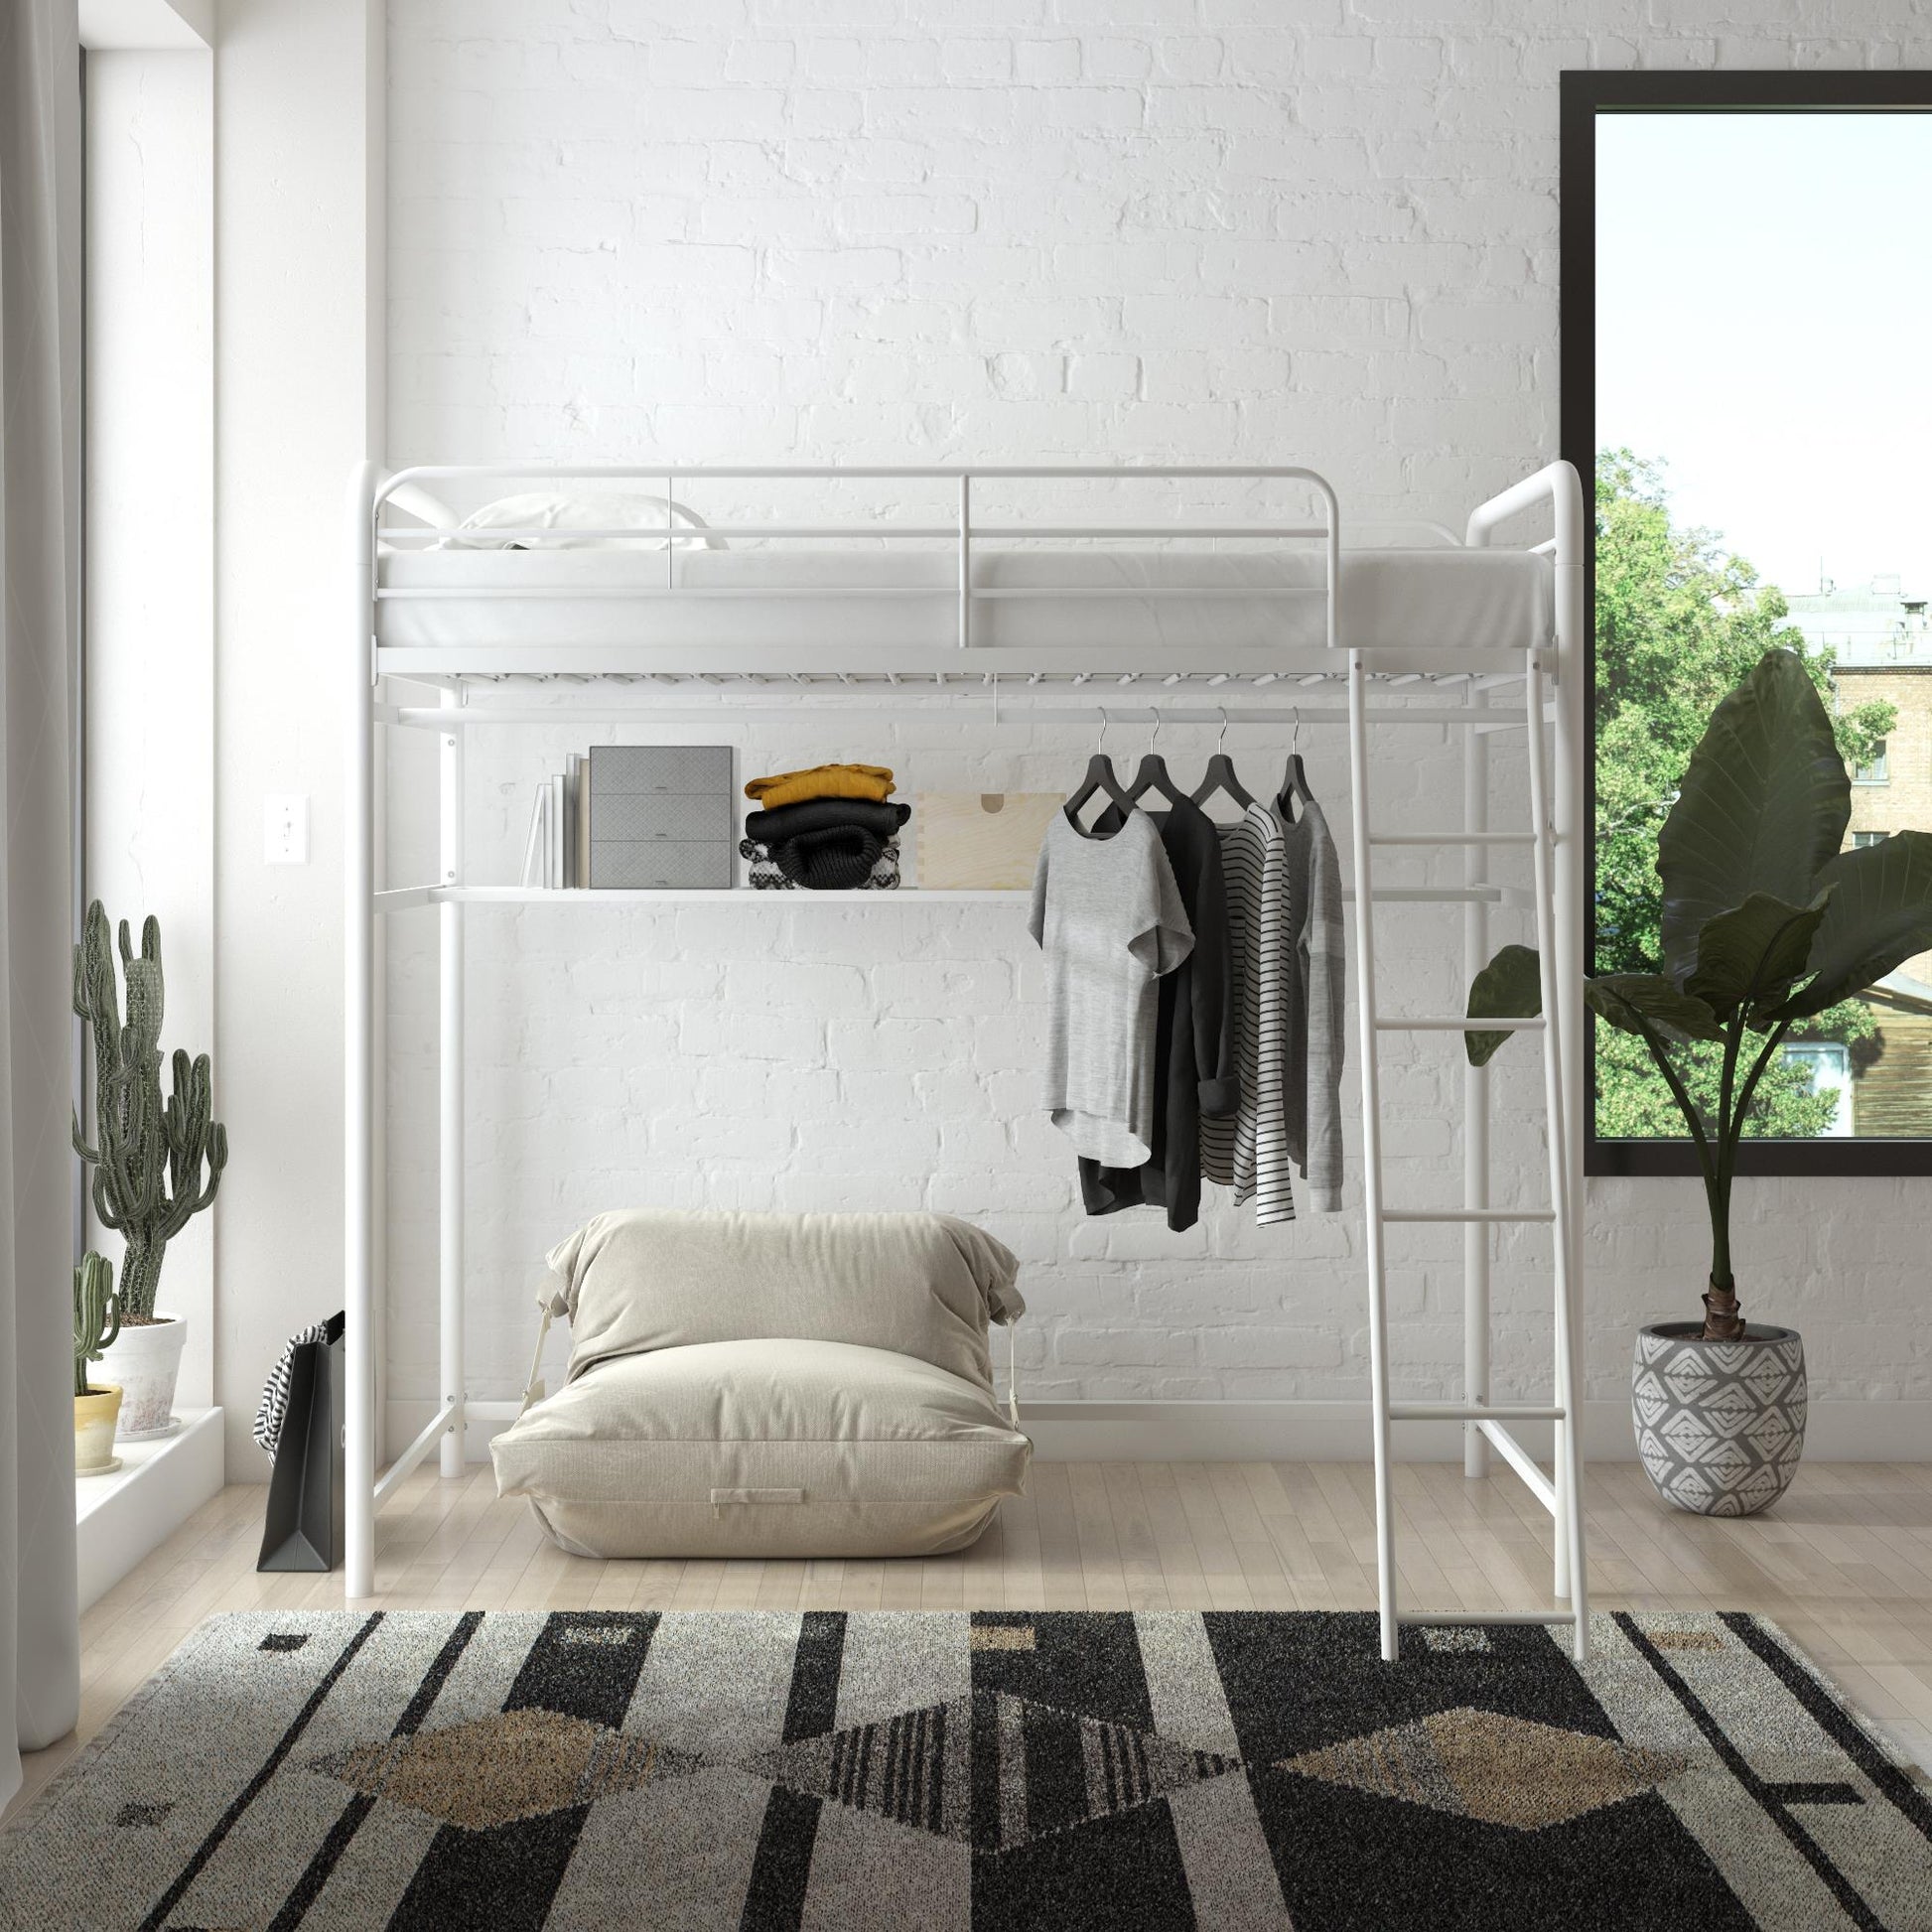 Knox Metal Loft Bed with Under Bed Closet Storage Rod - White - Twin